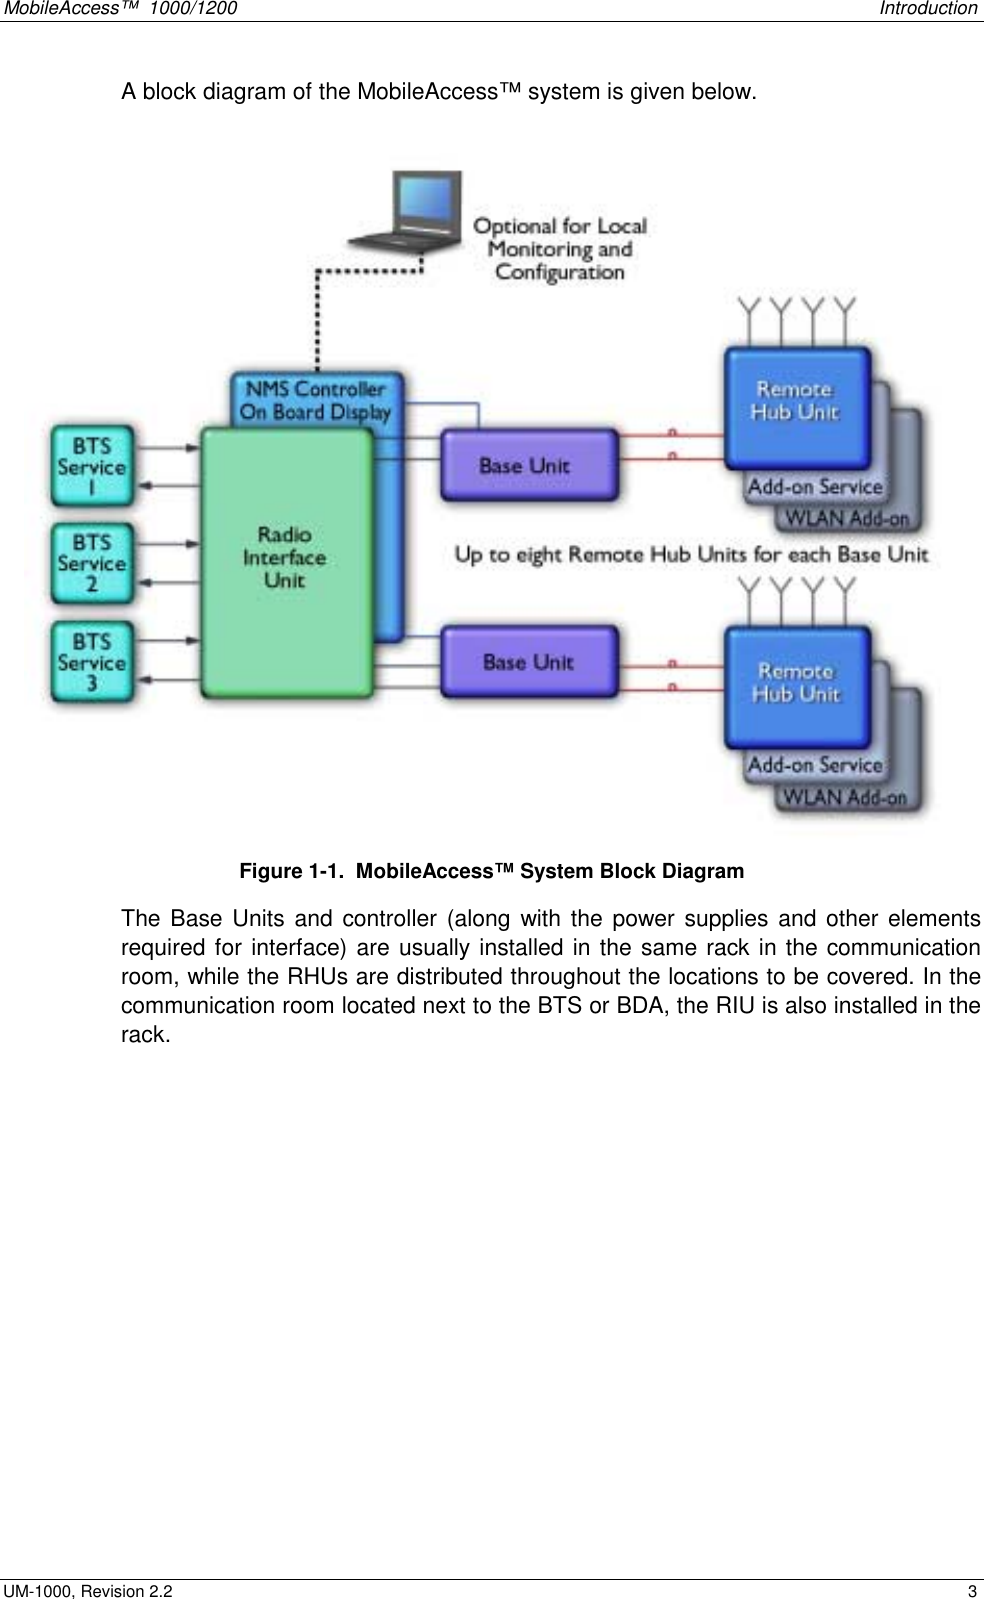 MobileAccess™  1000/1200    Introduction  UM-1000, Revision 2.2    3 A block diagram of the MobileAccess™ system is given below.  Figure  1-1.  MobileAccess™ System Block Diagram The Base Units and controller (along with the power supplies and other elements required for interface) are usually installed in the same rack in the communication room, while the RHUs are distributed throughout the locations to be covered. In the communication room located next to the BTS or BDA, the RIU is also installed in the rack. 